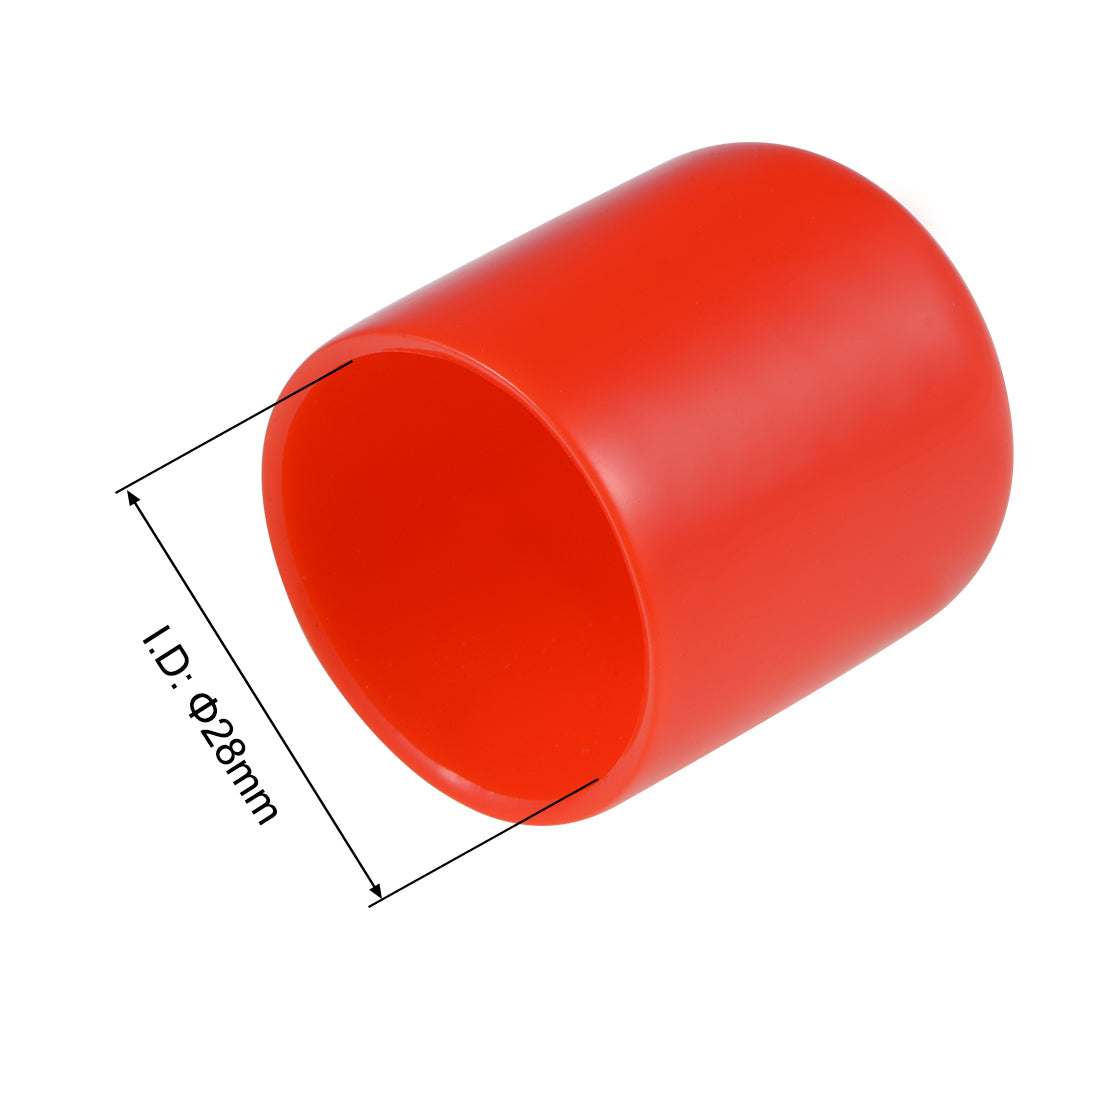 uxcell Uxcell 15pcs Rubber End Caps 28mm ID 30mm Height Screw Thread Protectors Red